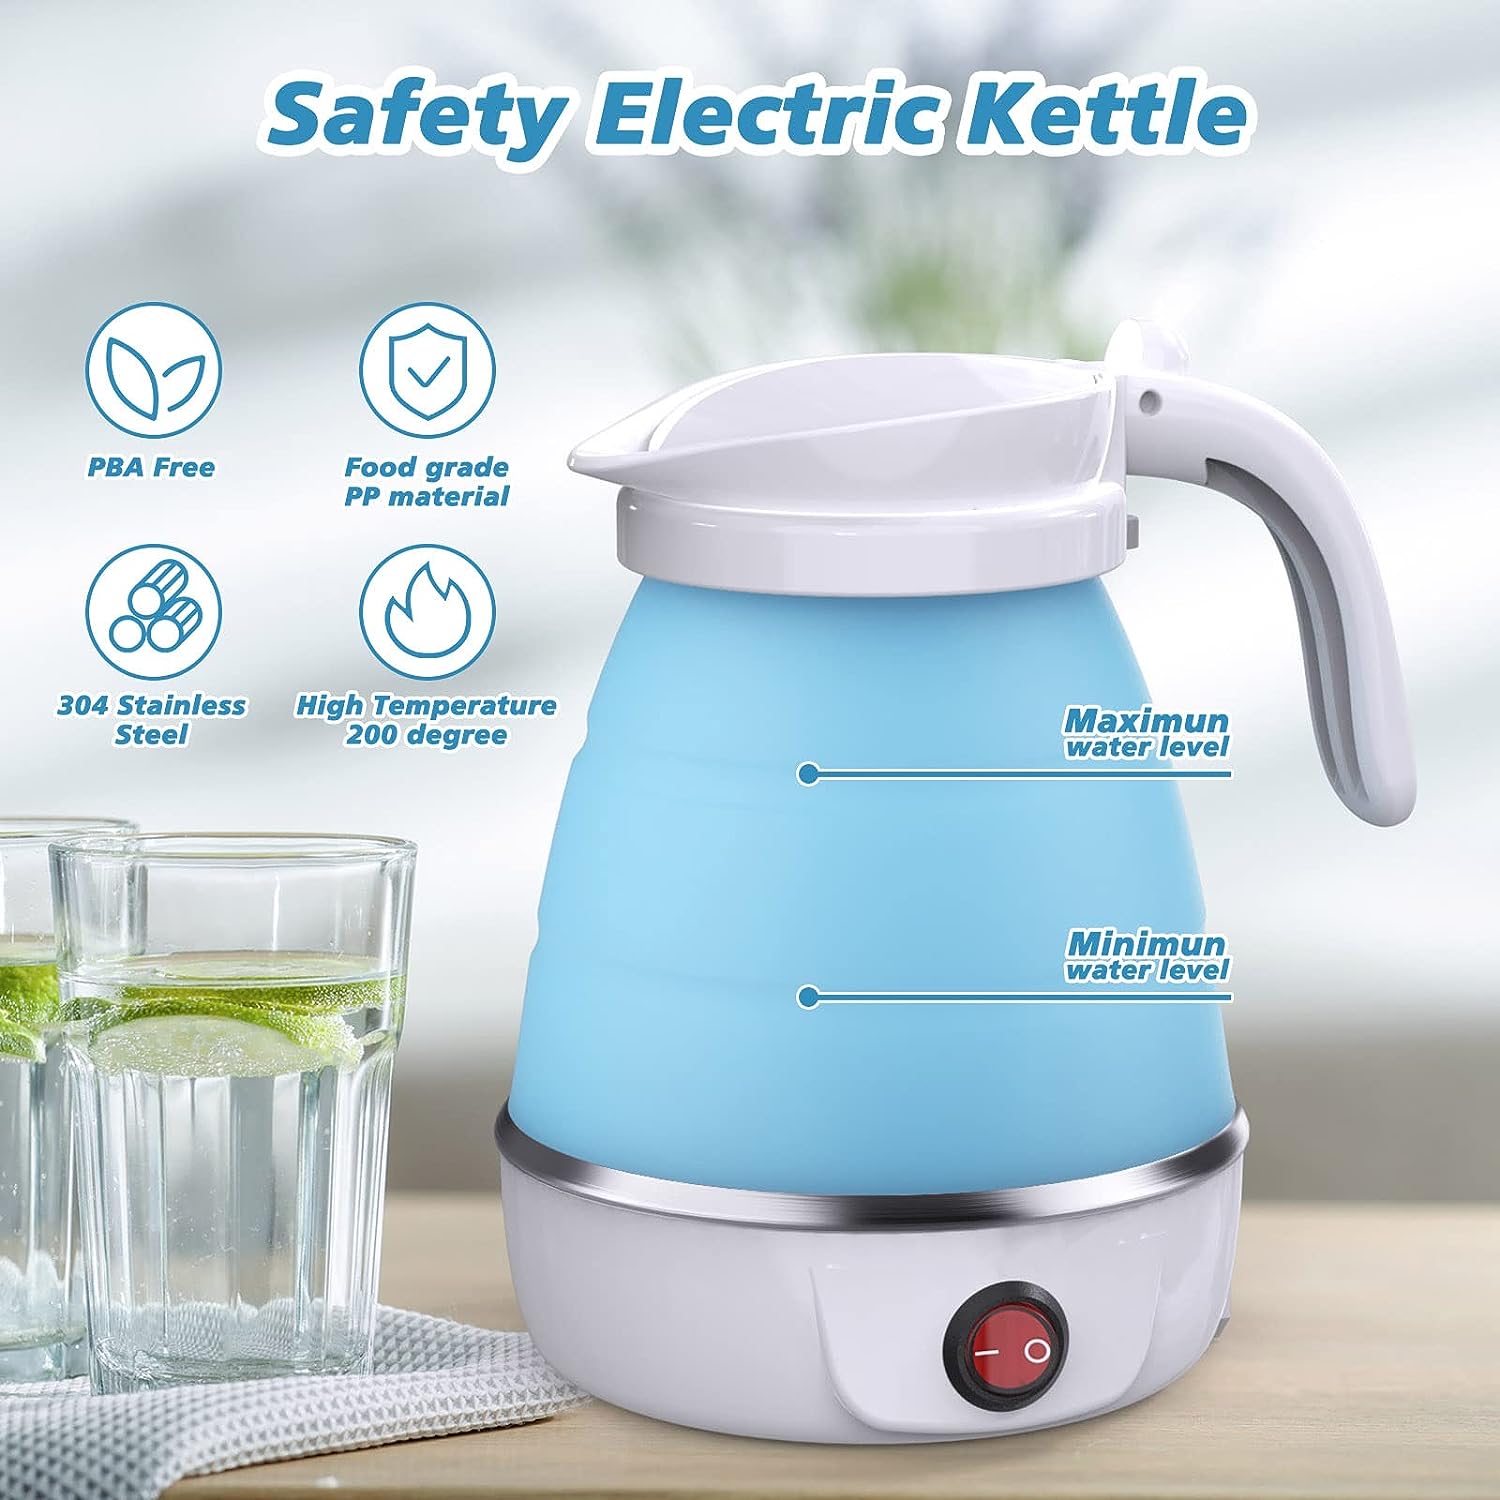 Foldable Electric Kettle, Camping Kettle, Mini Travel Kettle, Silicone Electric Water Boiler, Tea, Coffee Kettle, Collapsible Kettle With Separable Power Cord For Outdoor Hiking Camping, Blue